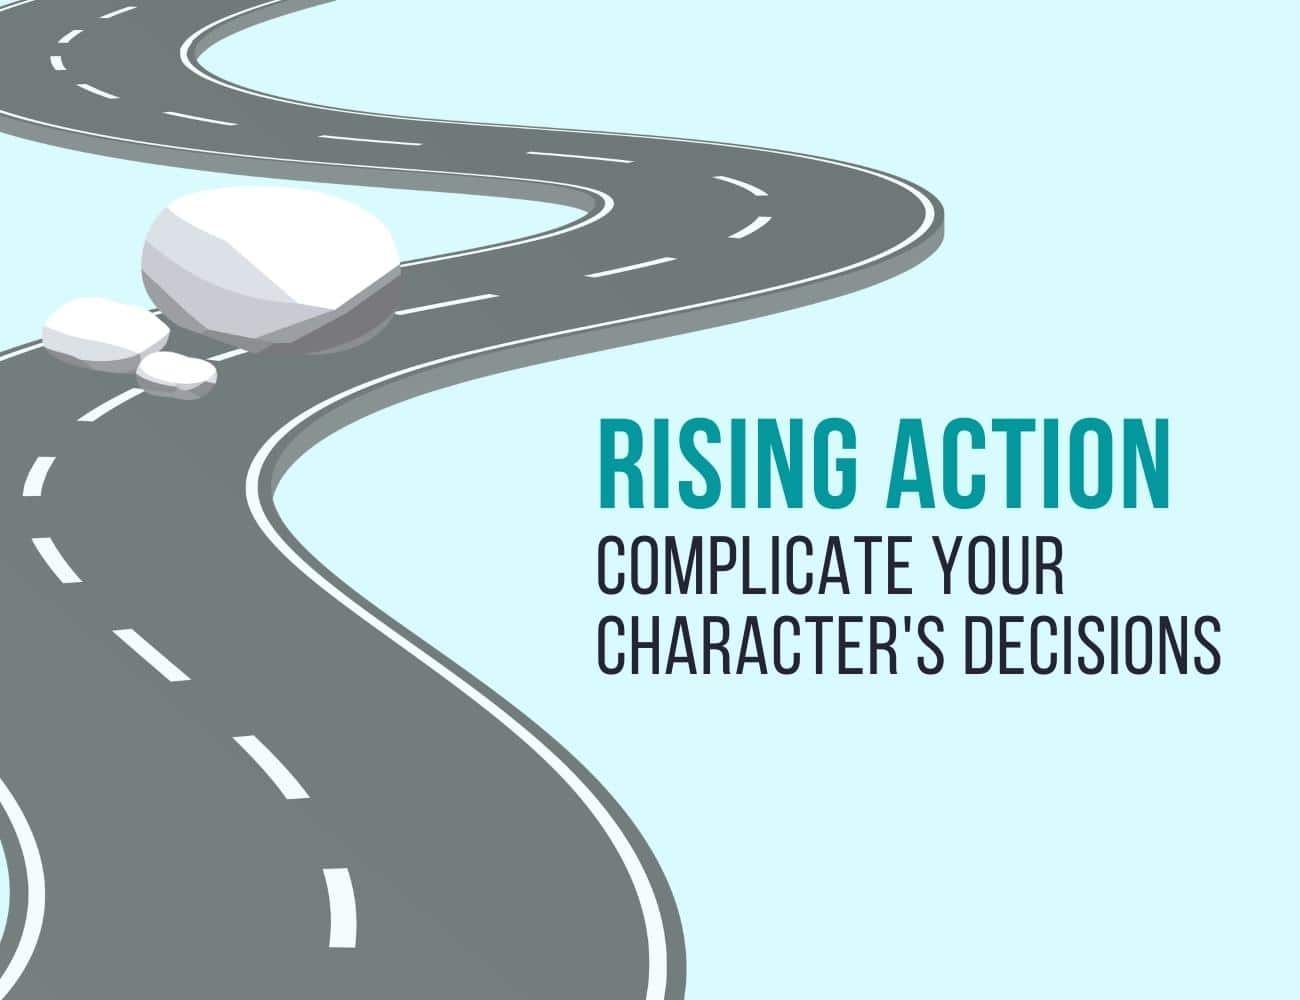 Rising Action, Complicate Your Character's Decisions on light blue background